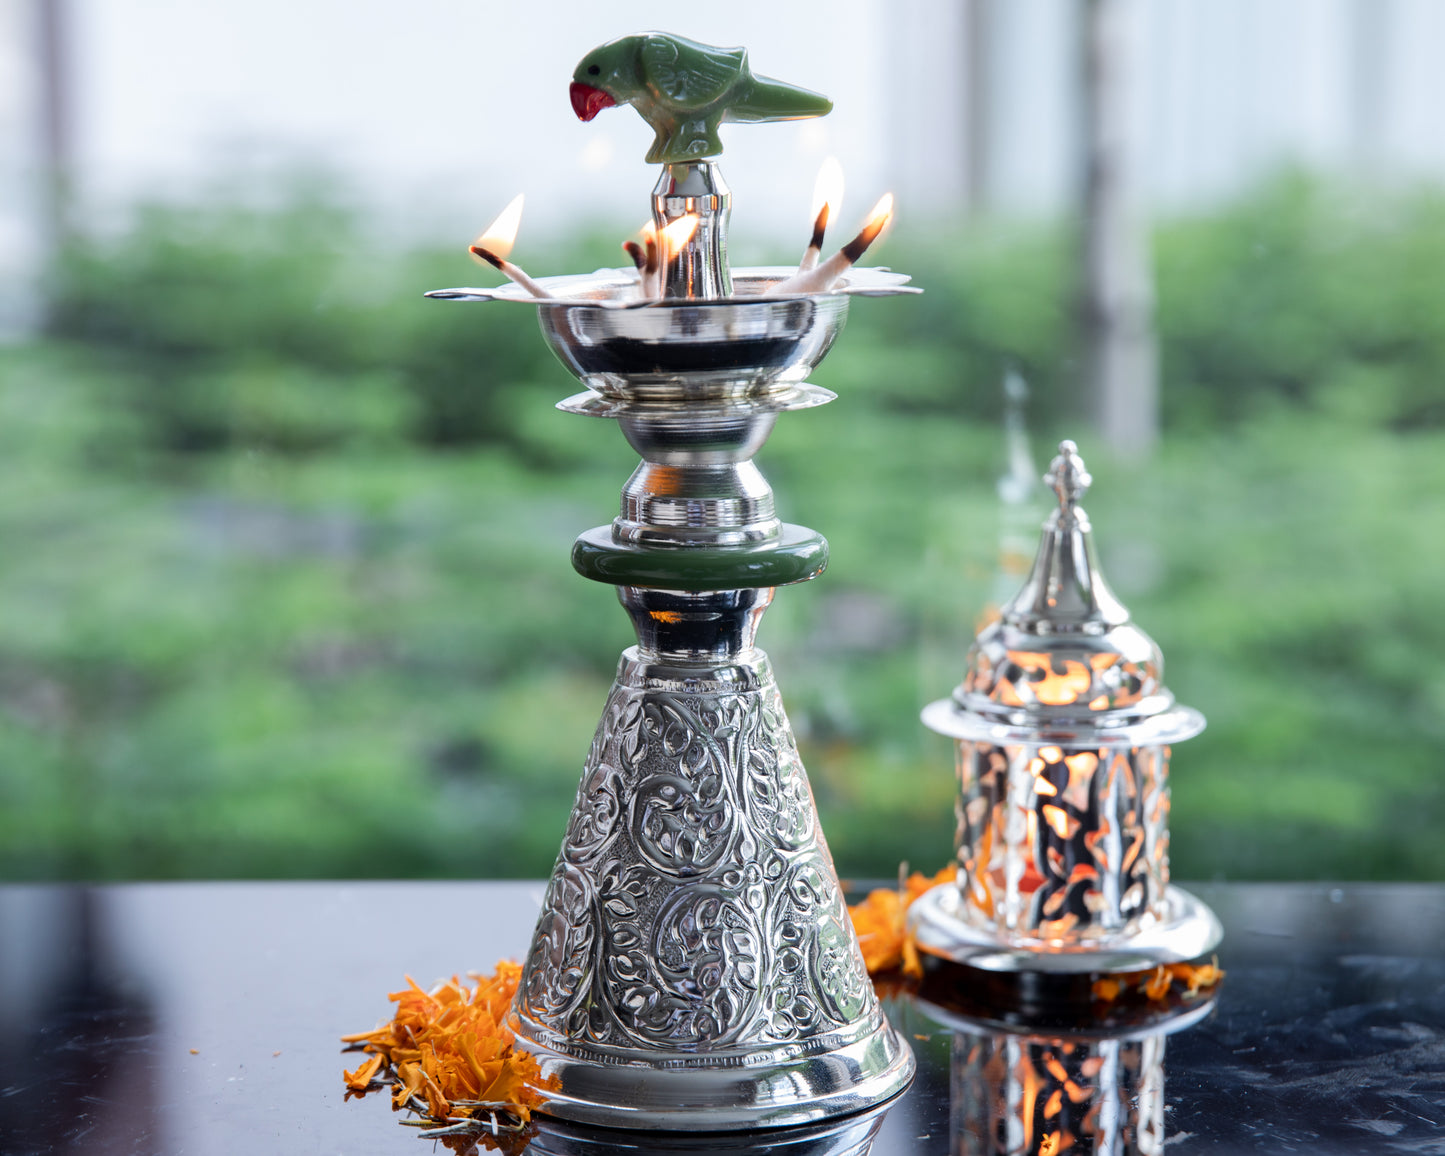 Crafted from high-quality silver, this tall diya radiates a lustrous and timeless glow when lit.